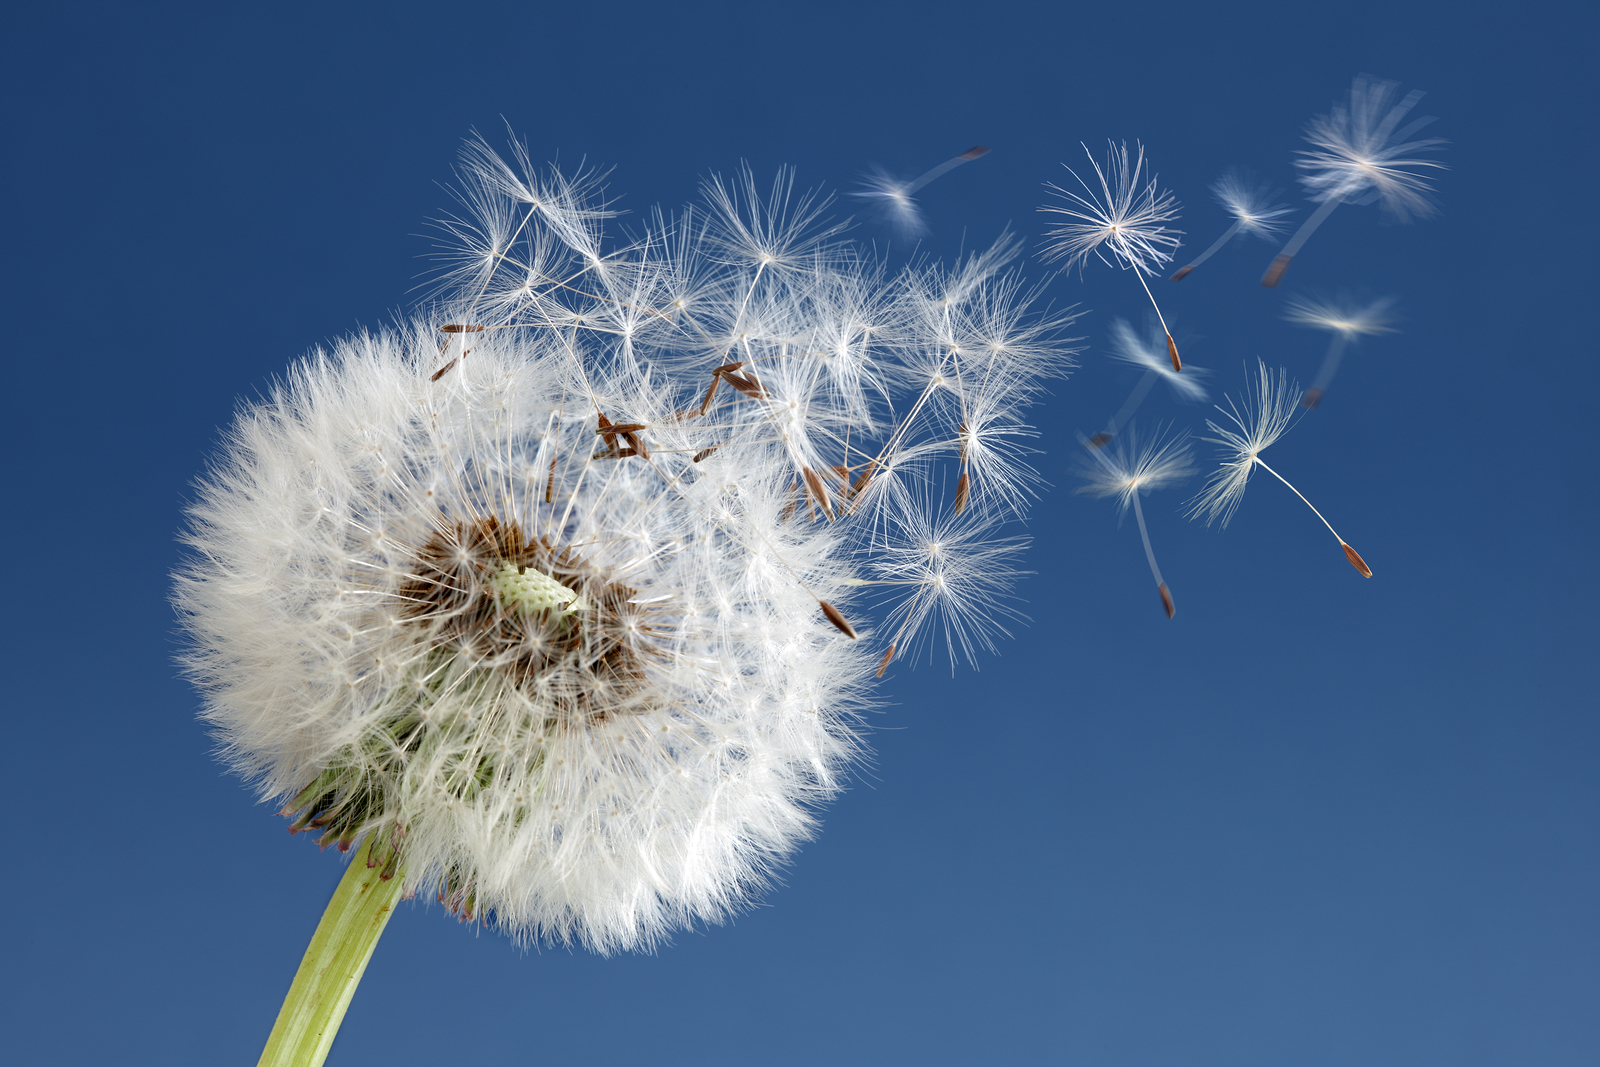 Dandelion with seeds blowing away in the wind across a clear blu